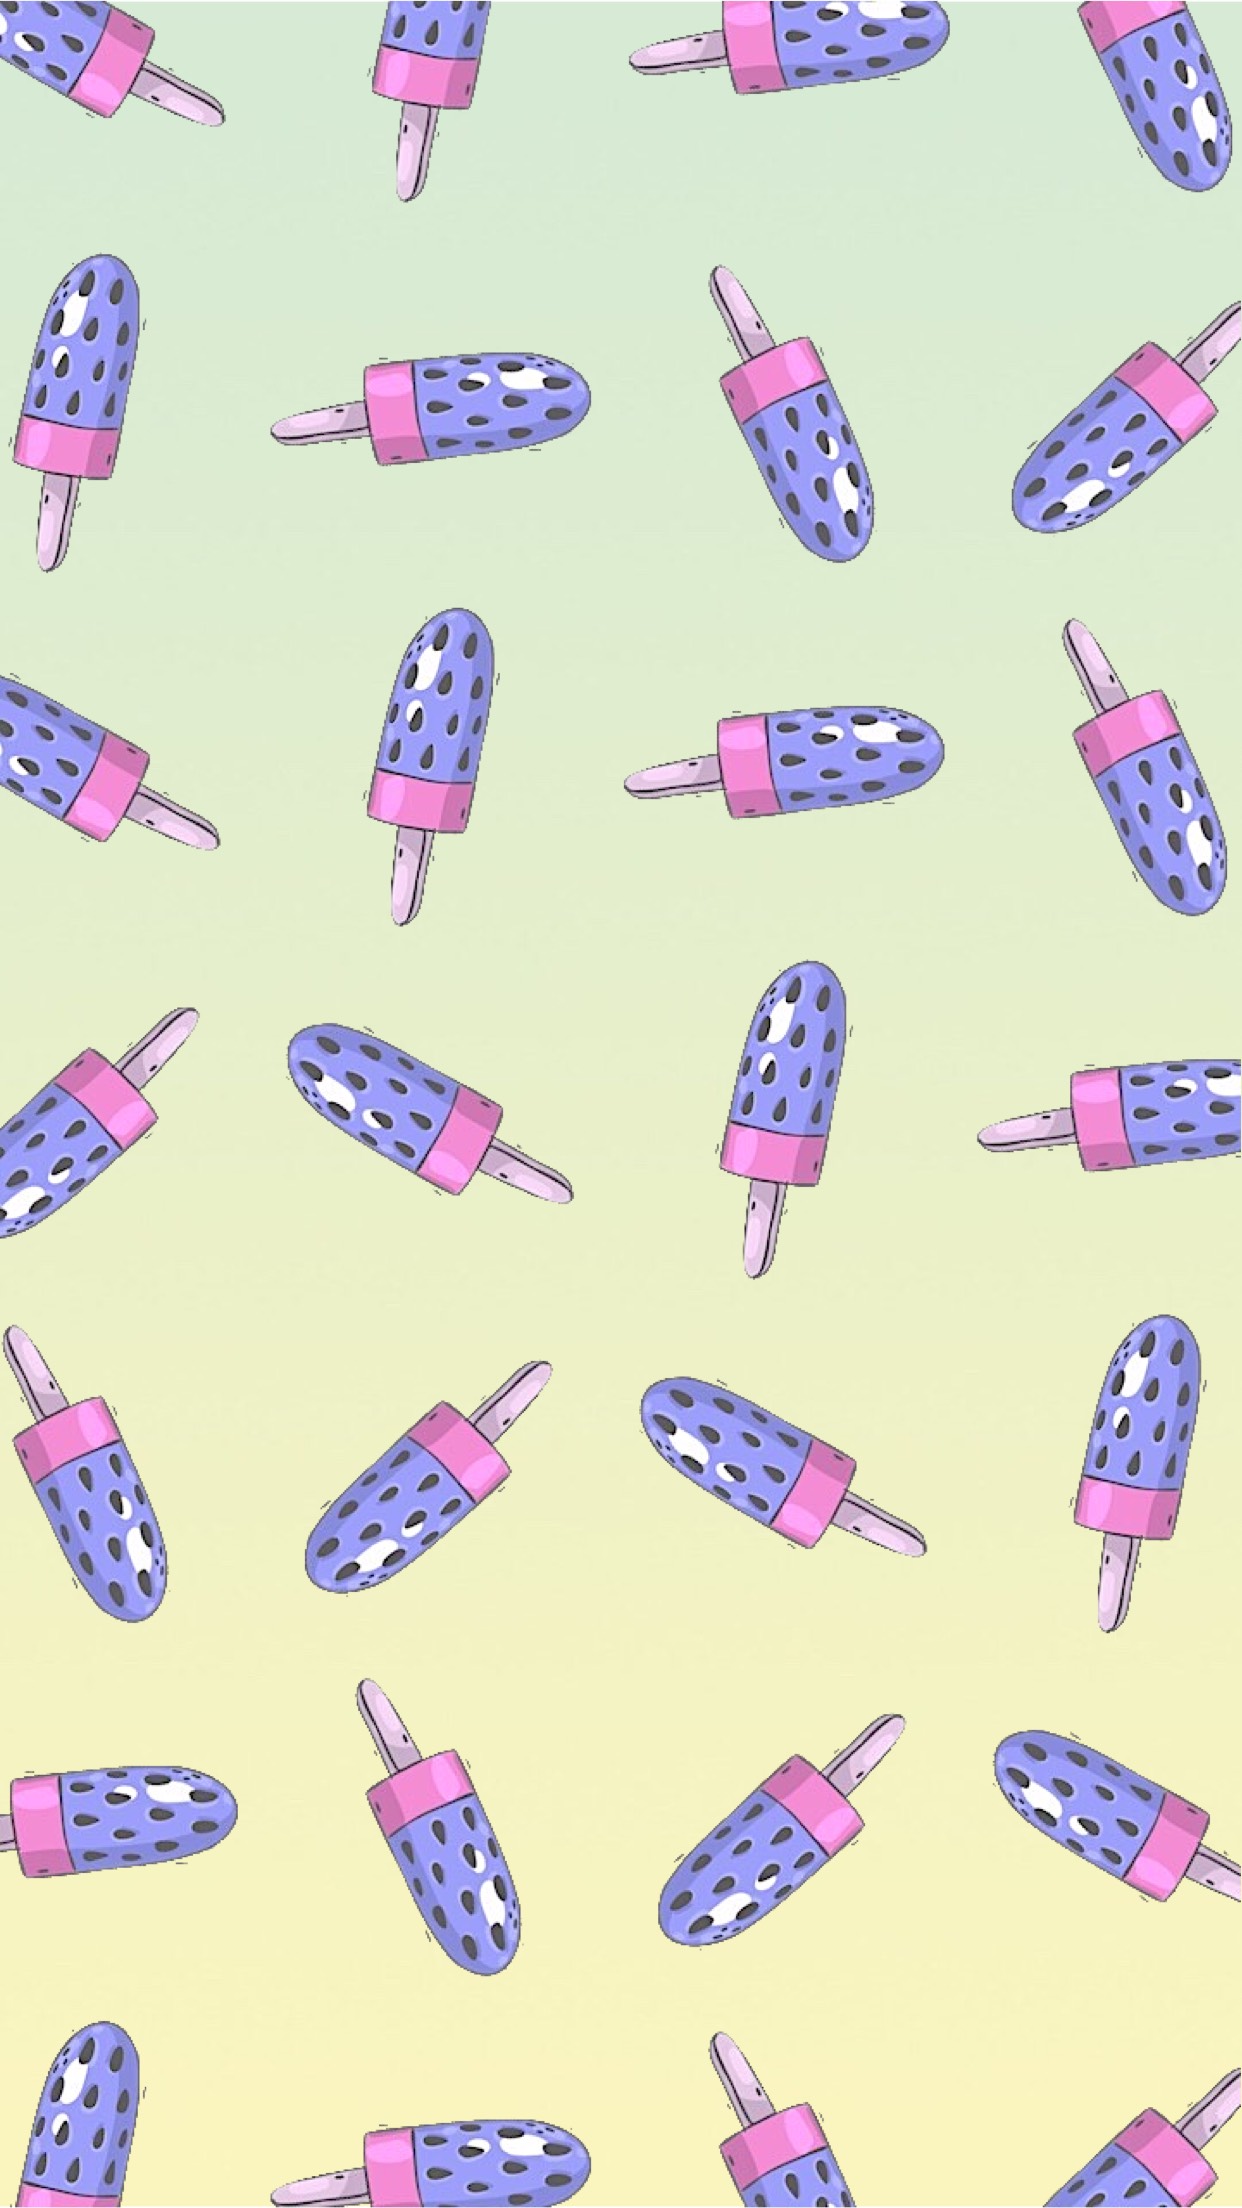 A Pattern Of Popsicles With Polka Dots On Them Zoom Backgrounds Template